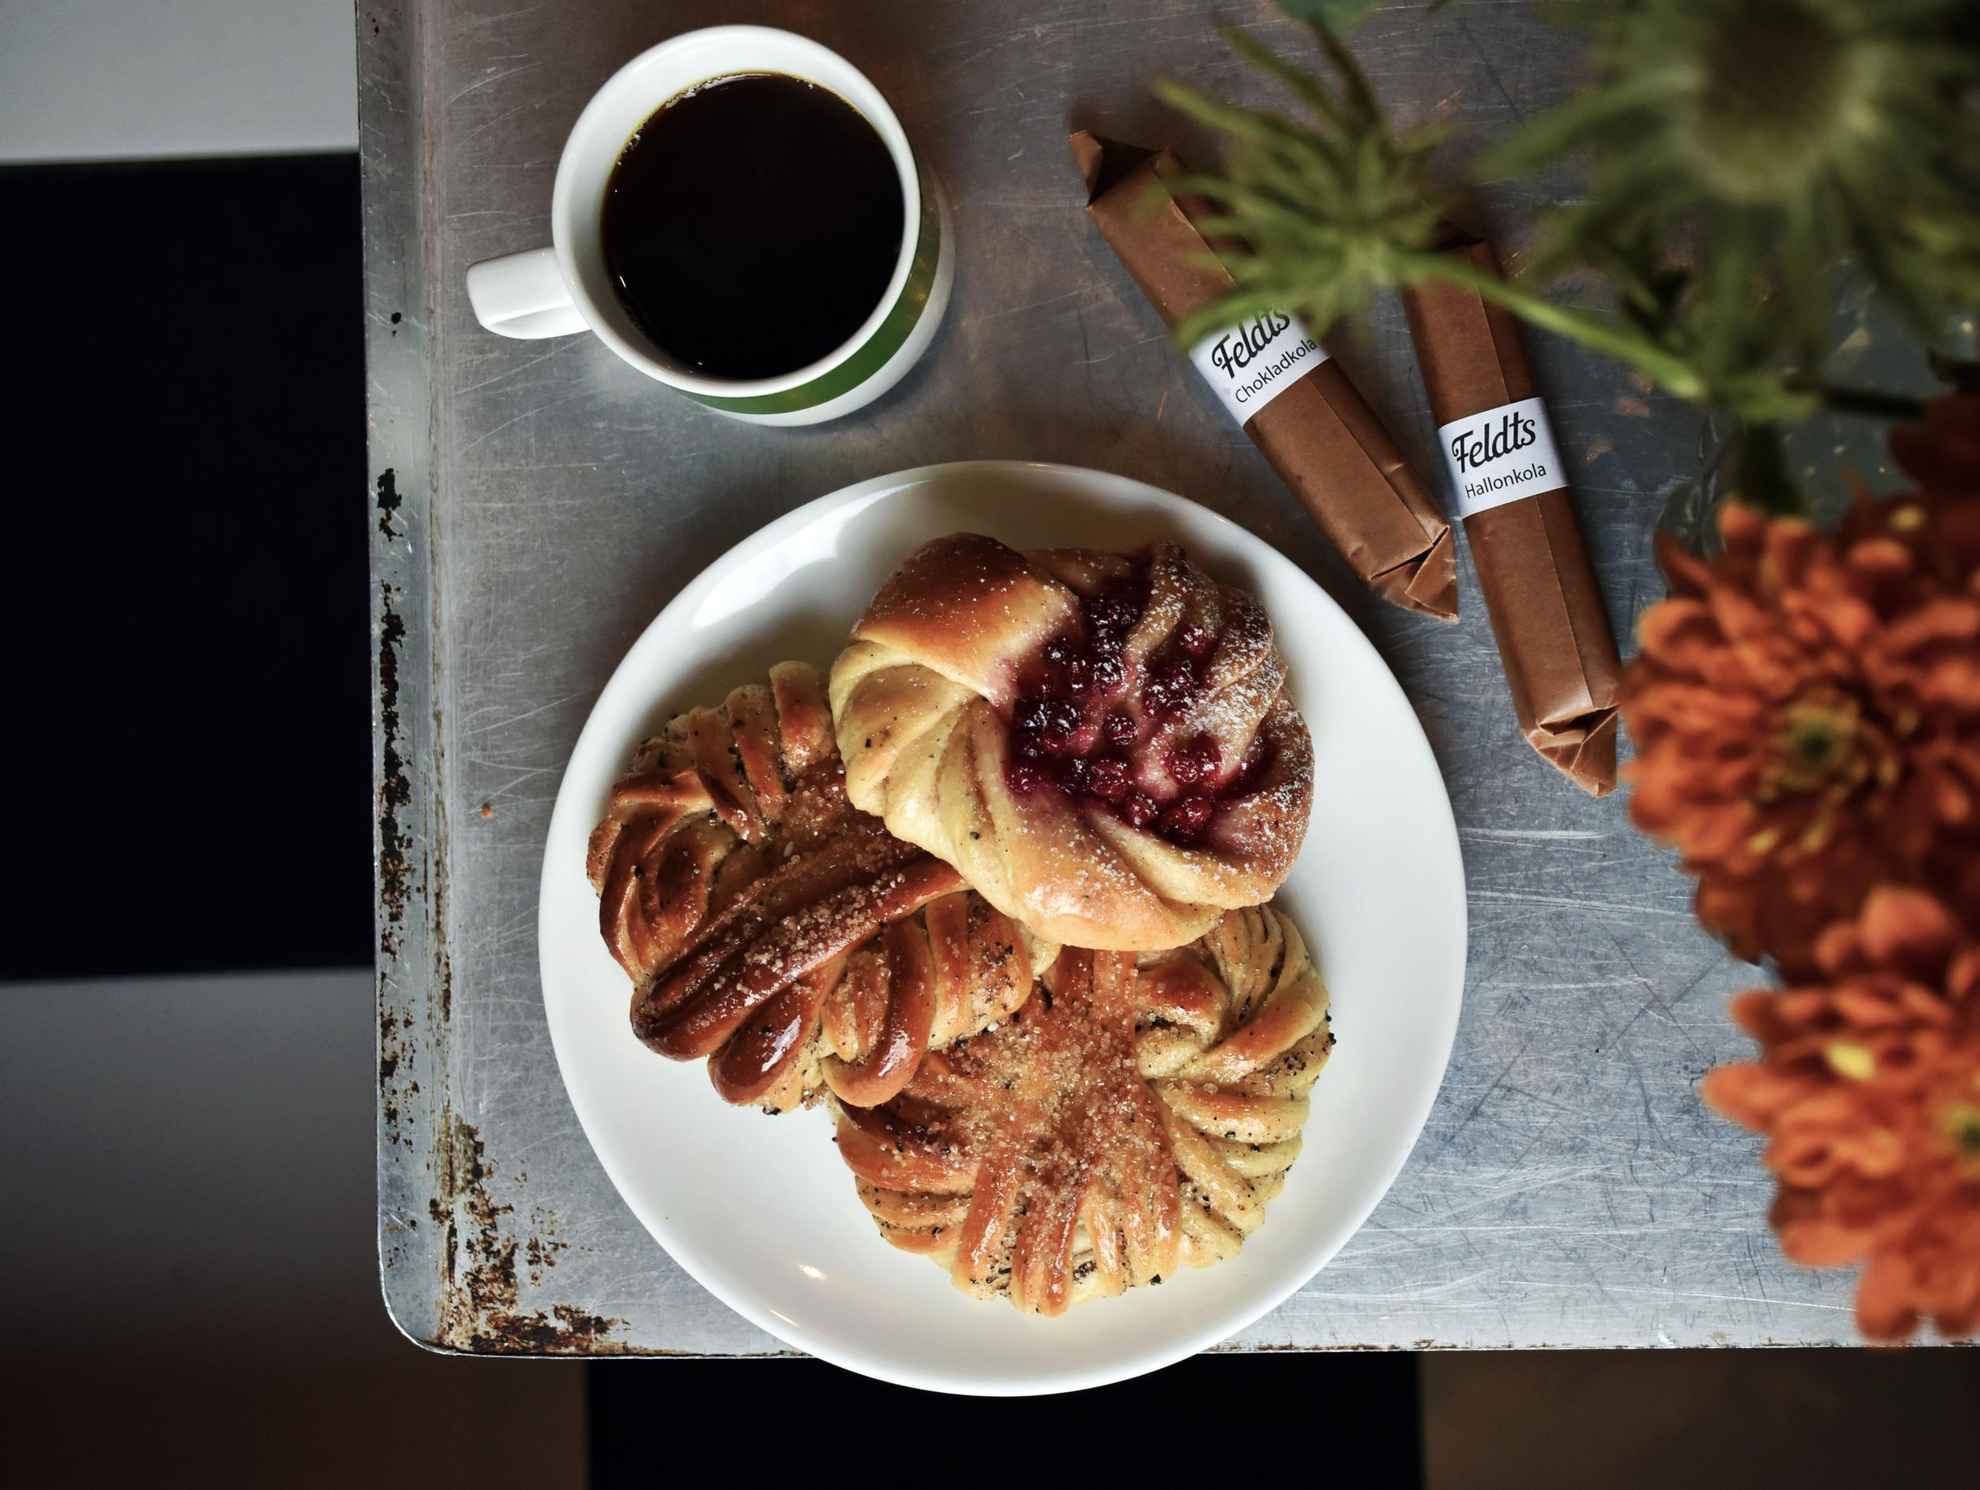 Close-up on a grey, wooden table with a cup of black coffee and three cardamom buns on a plate. Two packages of chocolate caramel is lying on the right side. Out of focus is a vase with orange flowers.